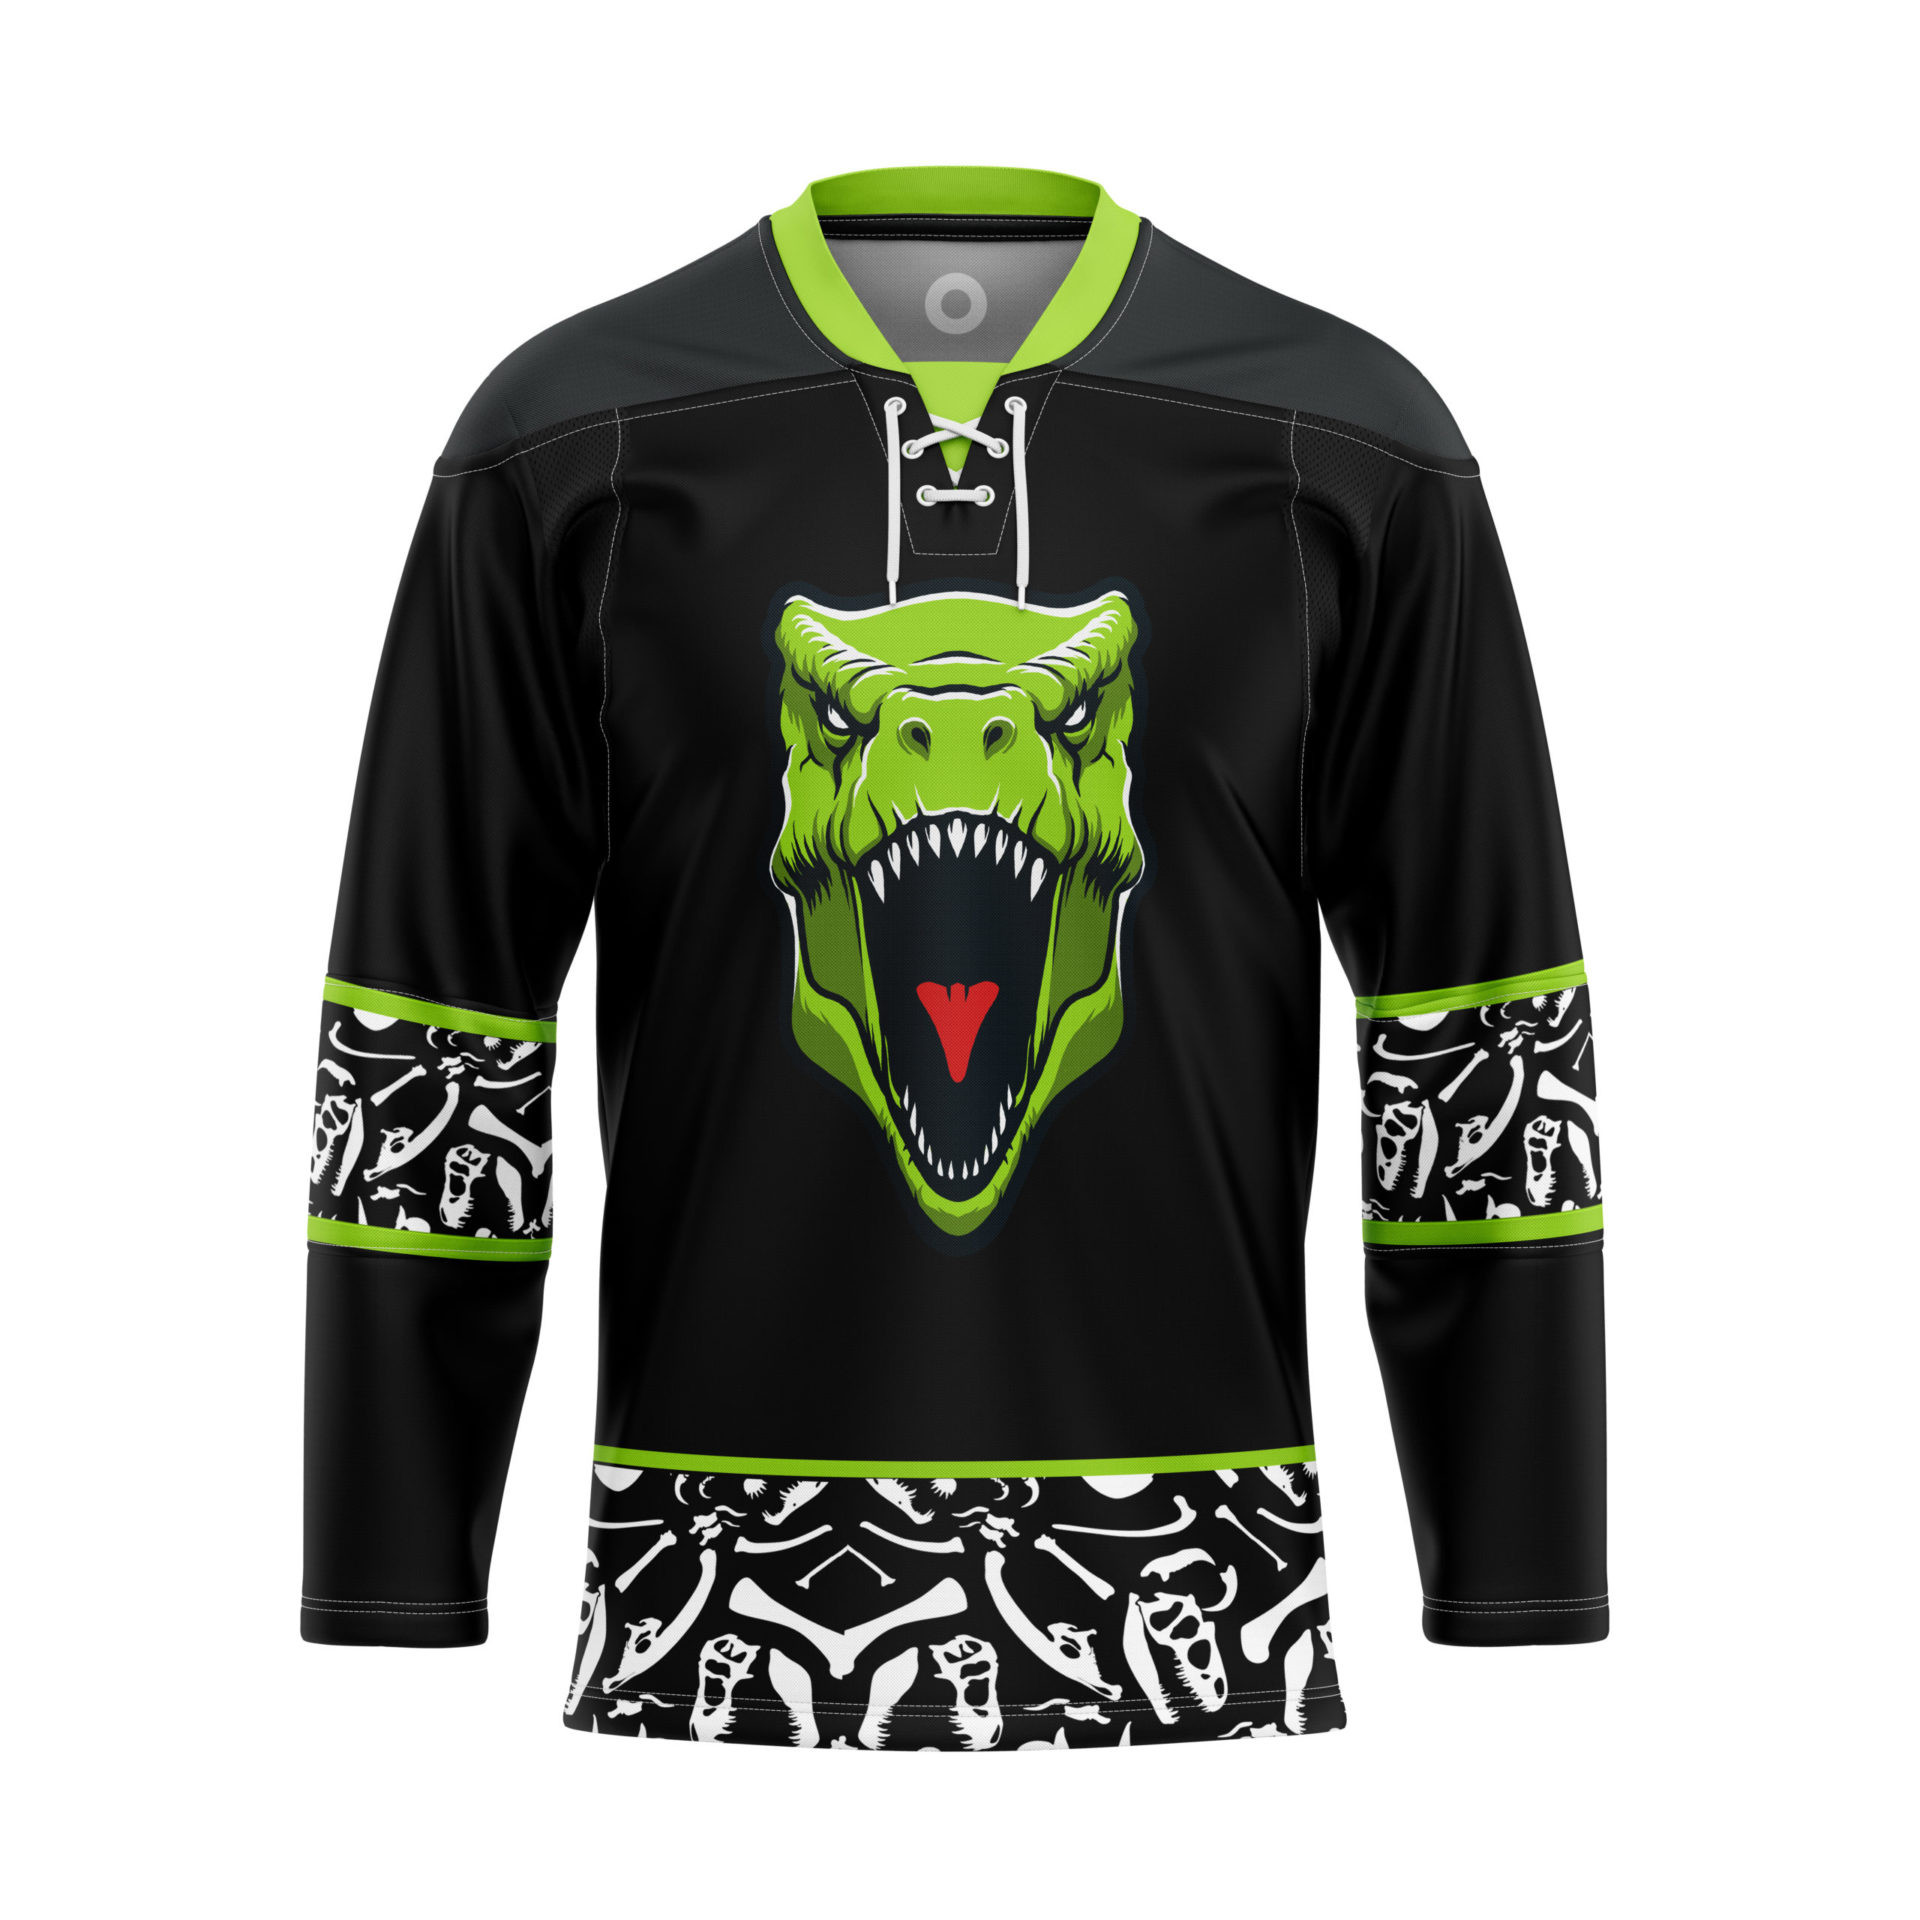 Excision - Limited edition Excision hockey jerseys up on my merch